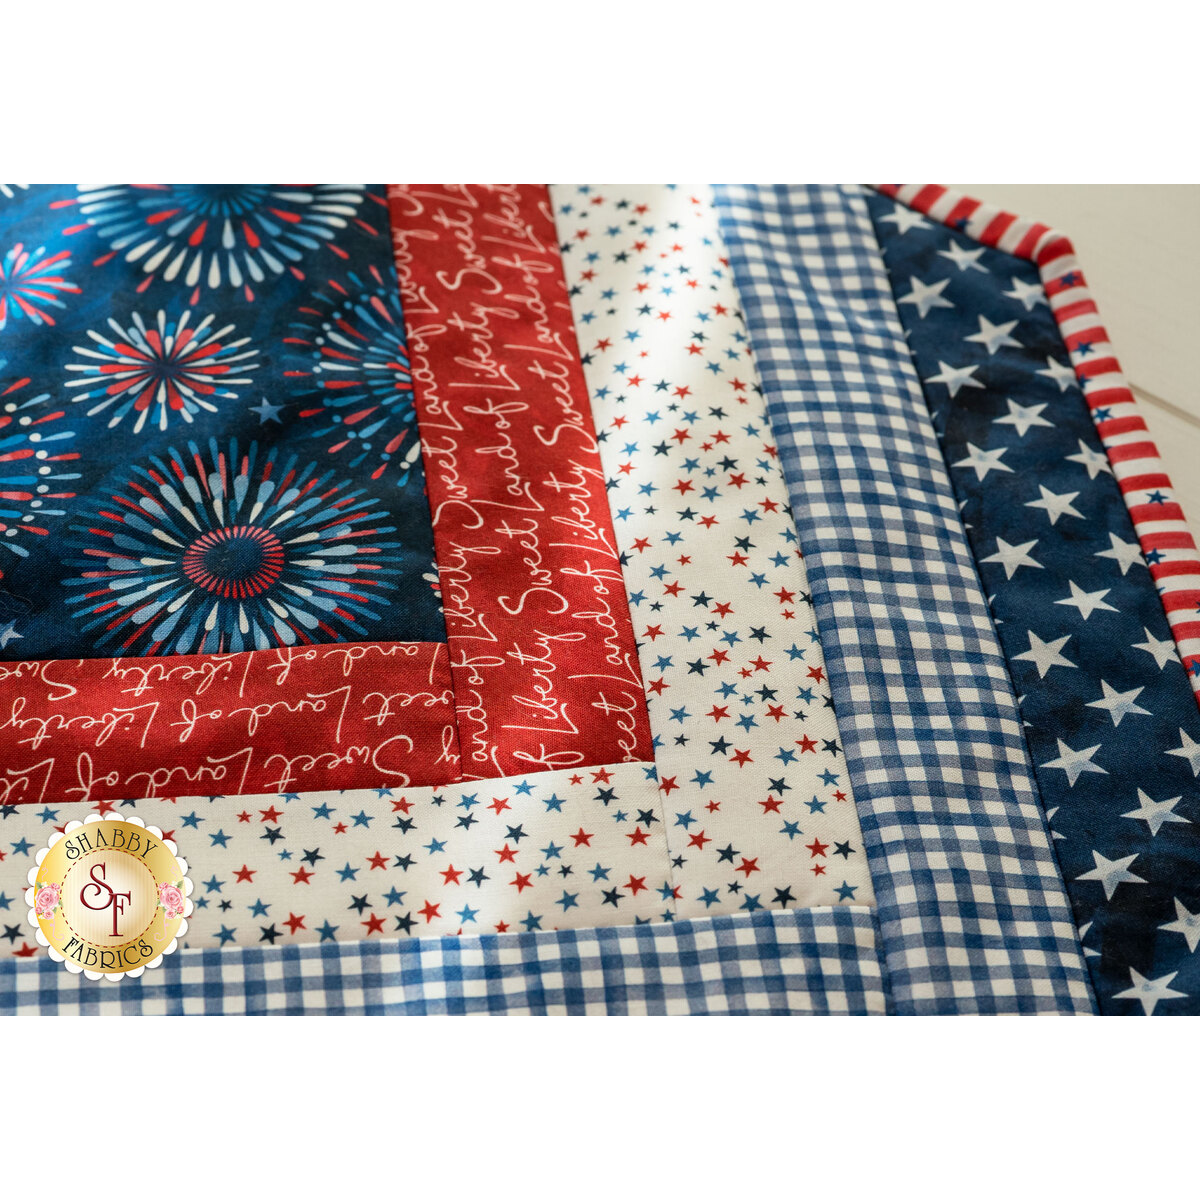 Textile Class - Quilt-As-You-Go Table Runner - Lower Hutt - Eventfinda